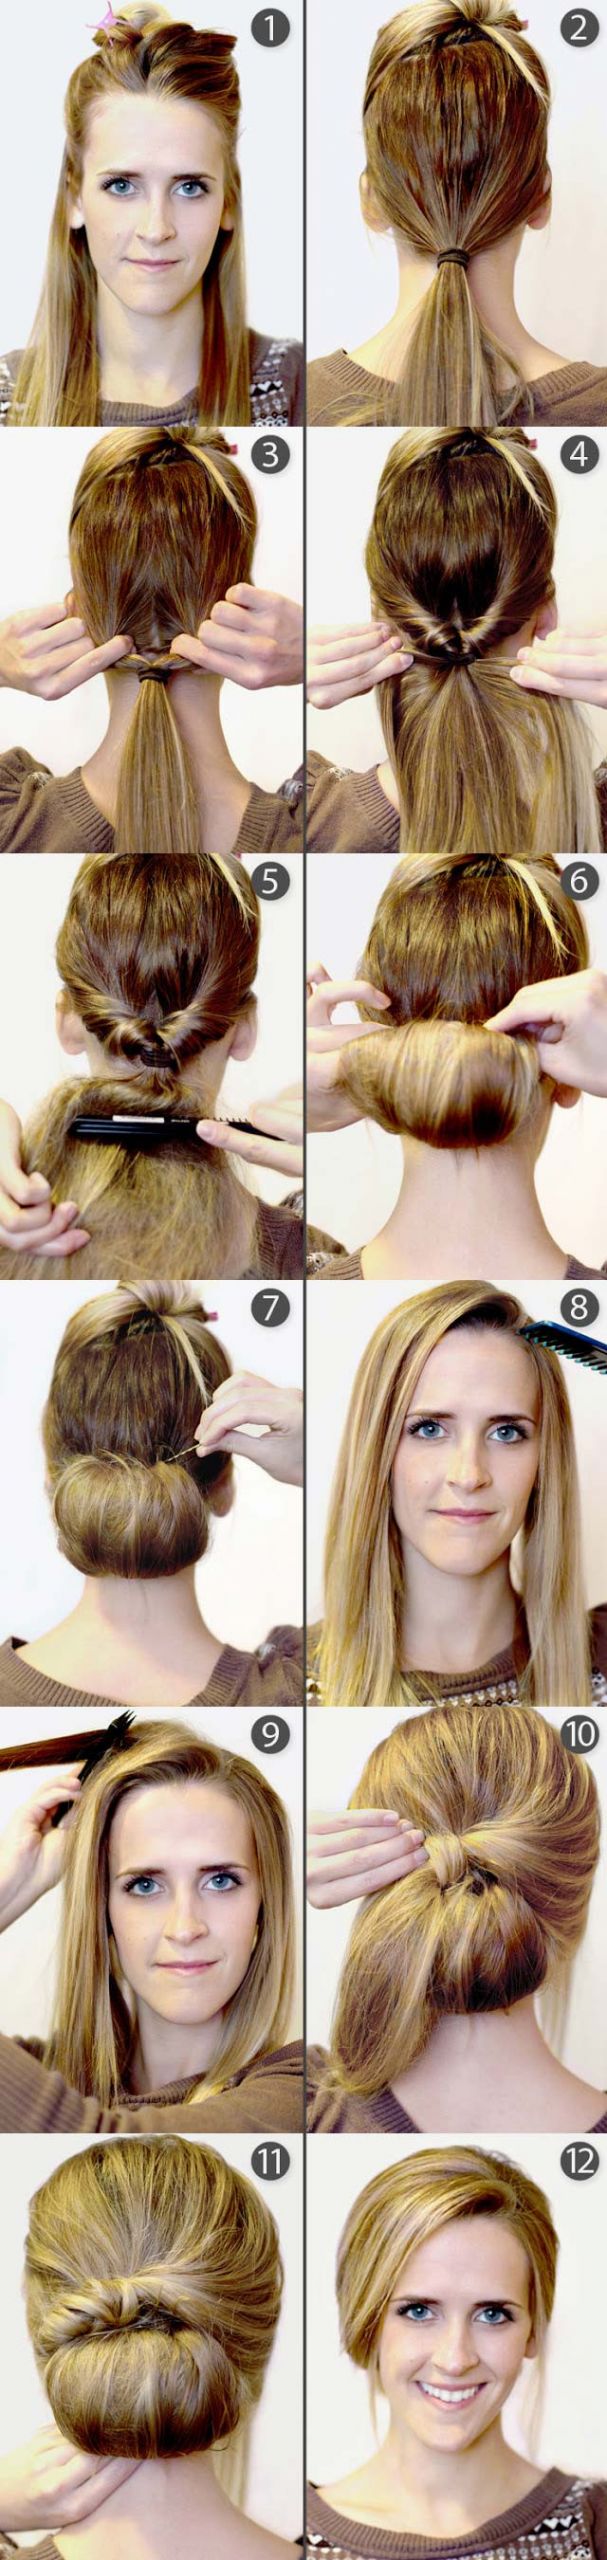 DIY Long Hairstyles
 9 Pretty DIY Hairstyles With Step by Step Tutorials